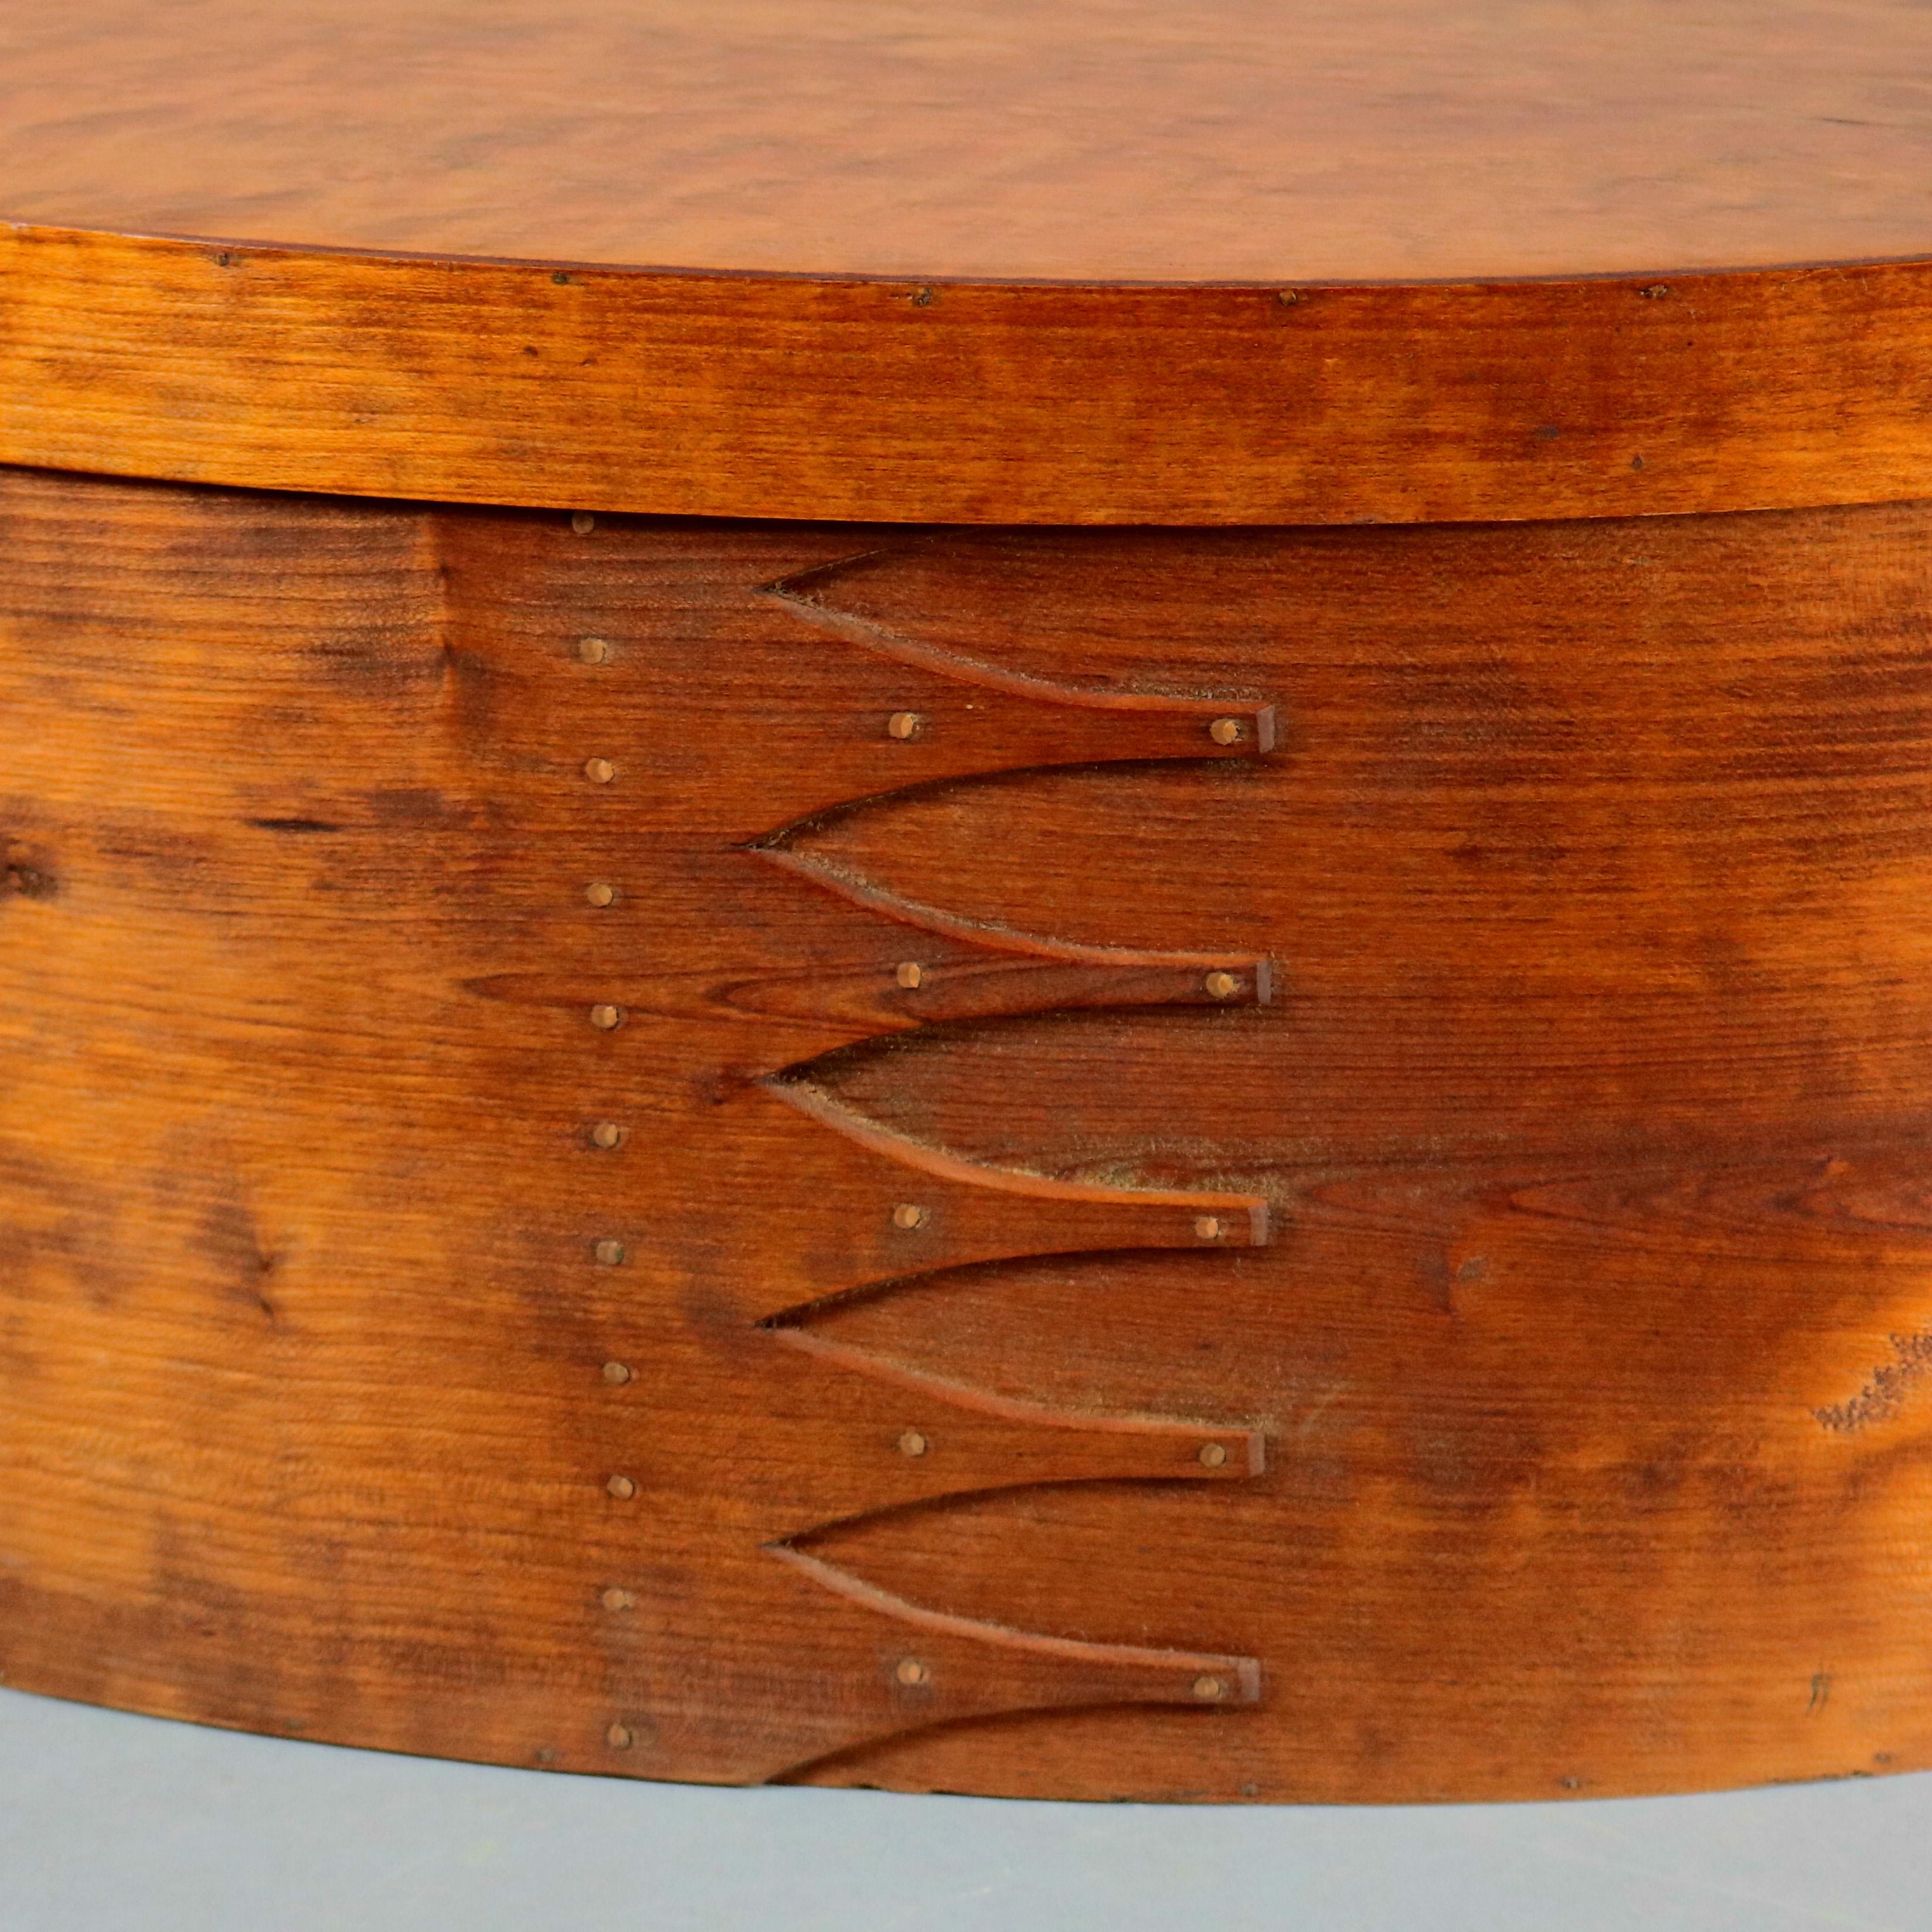 A Lesher School shaker box offers bentwood bird's-eye maple pegged construction in oval form with six Gothic-shaped finger joints (swallowtails) finished in copper tacks, 20th century.

Measures: 11.25